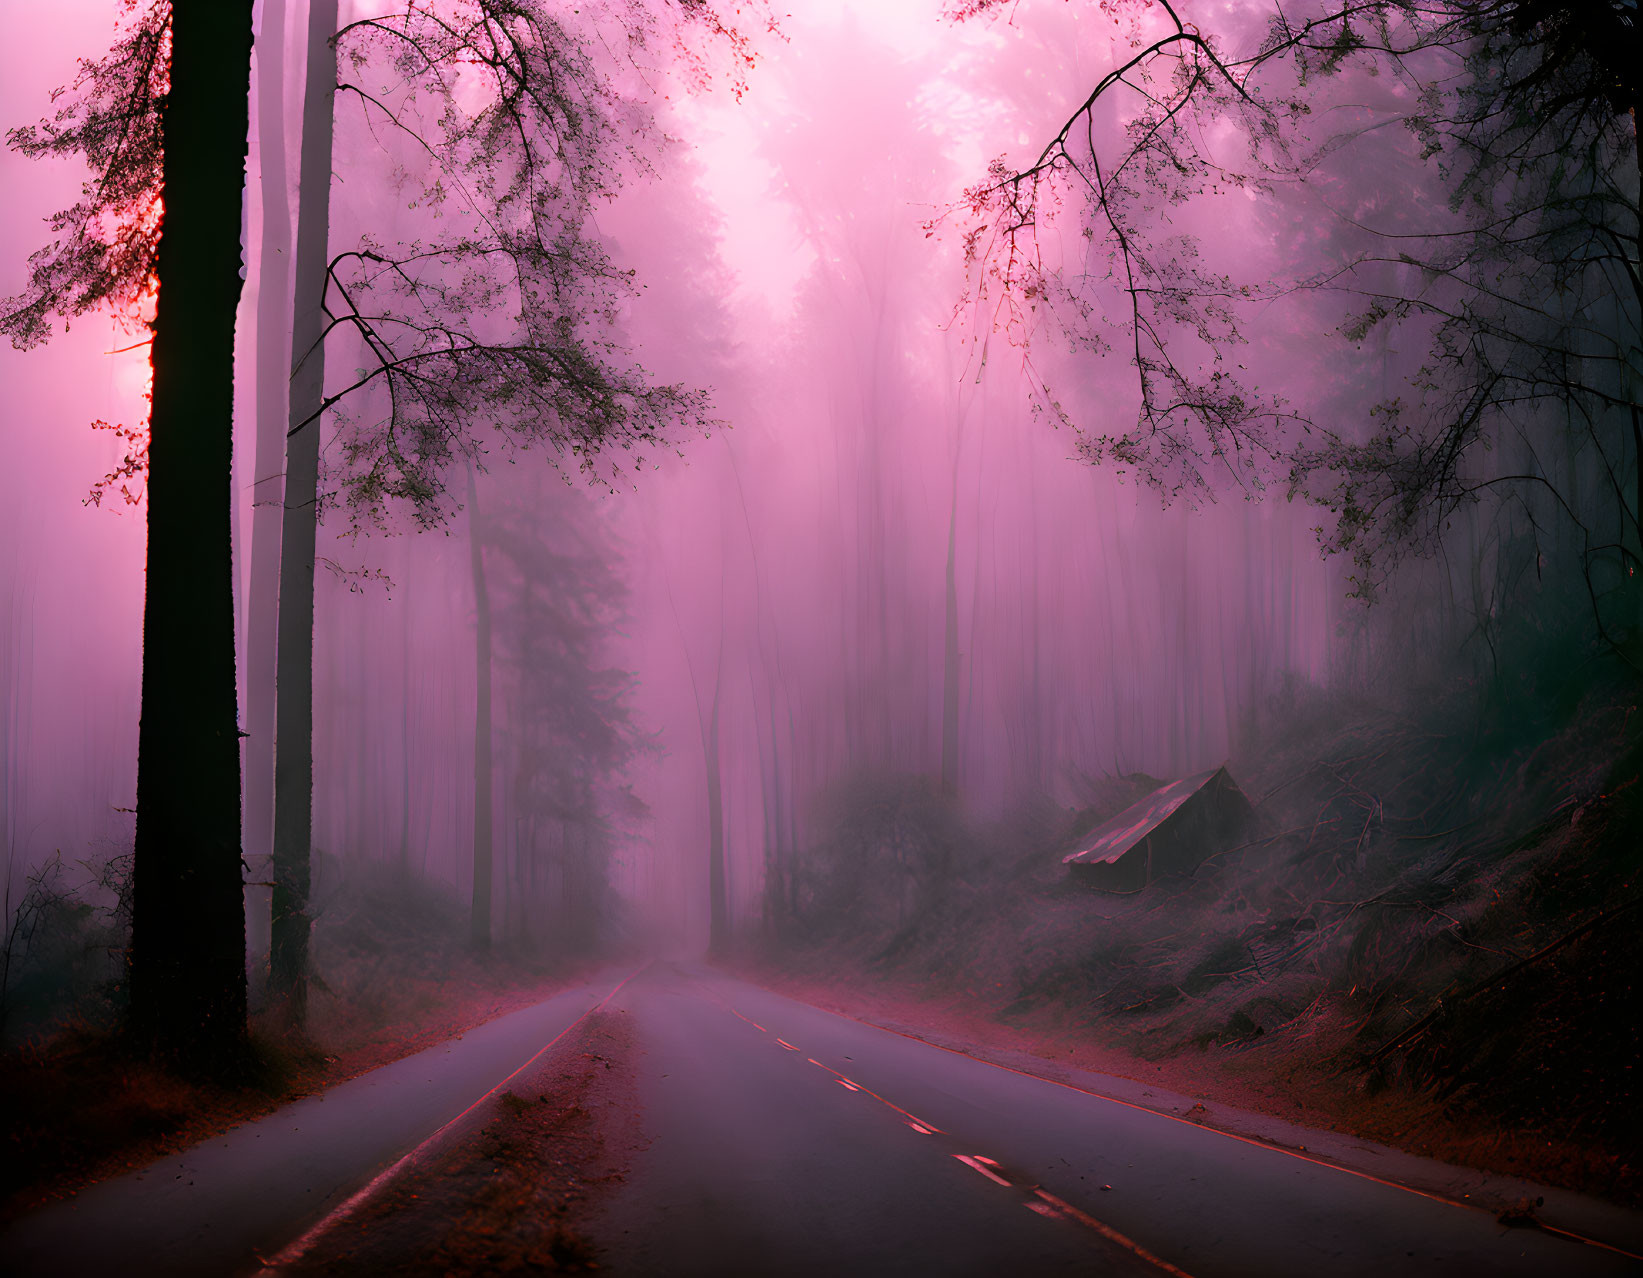 Desolate road in fog-covered forest with looming trees and pinkish hue